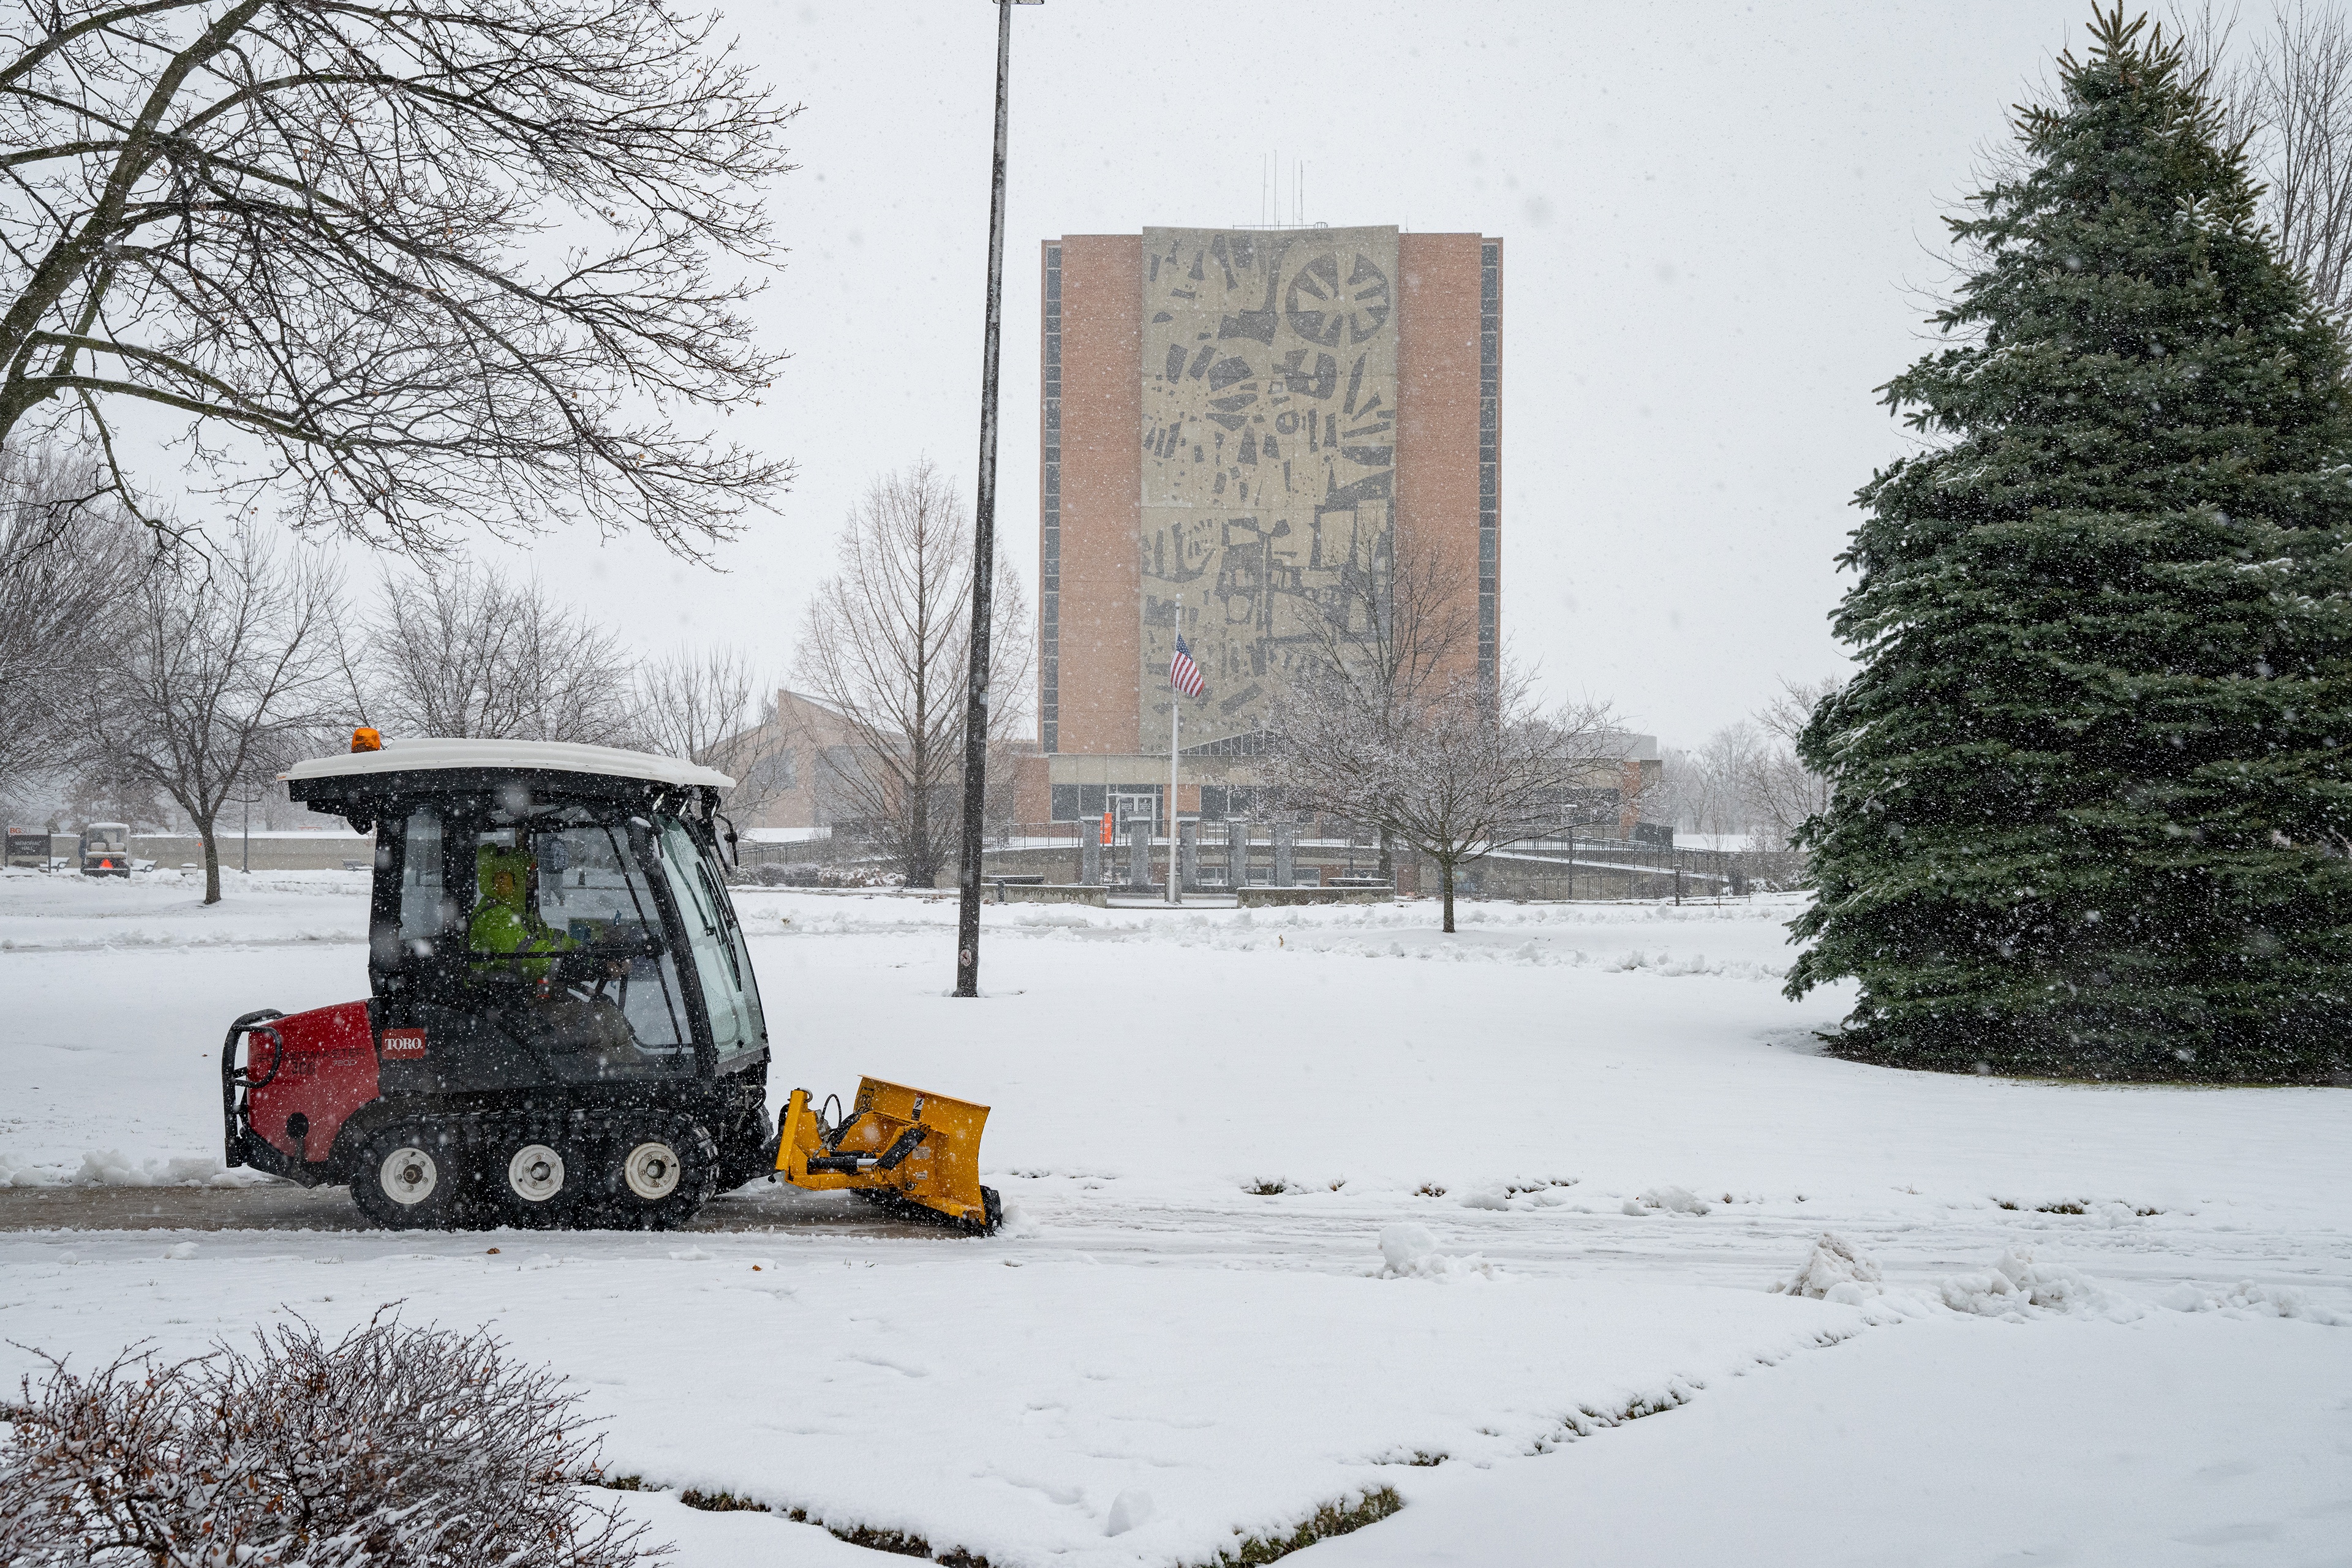 A snow removal tractor clears snow on BGSU campus